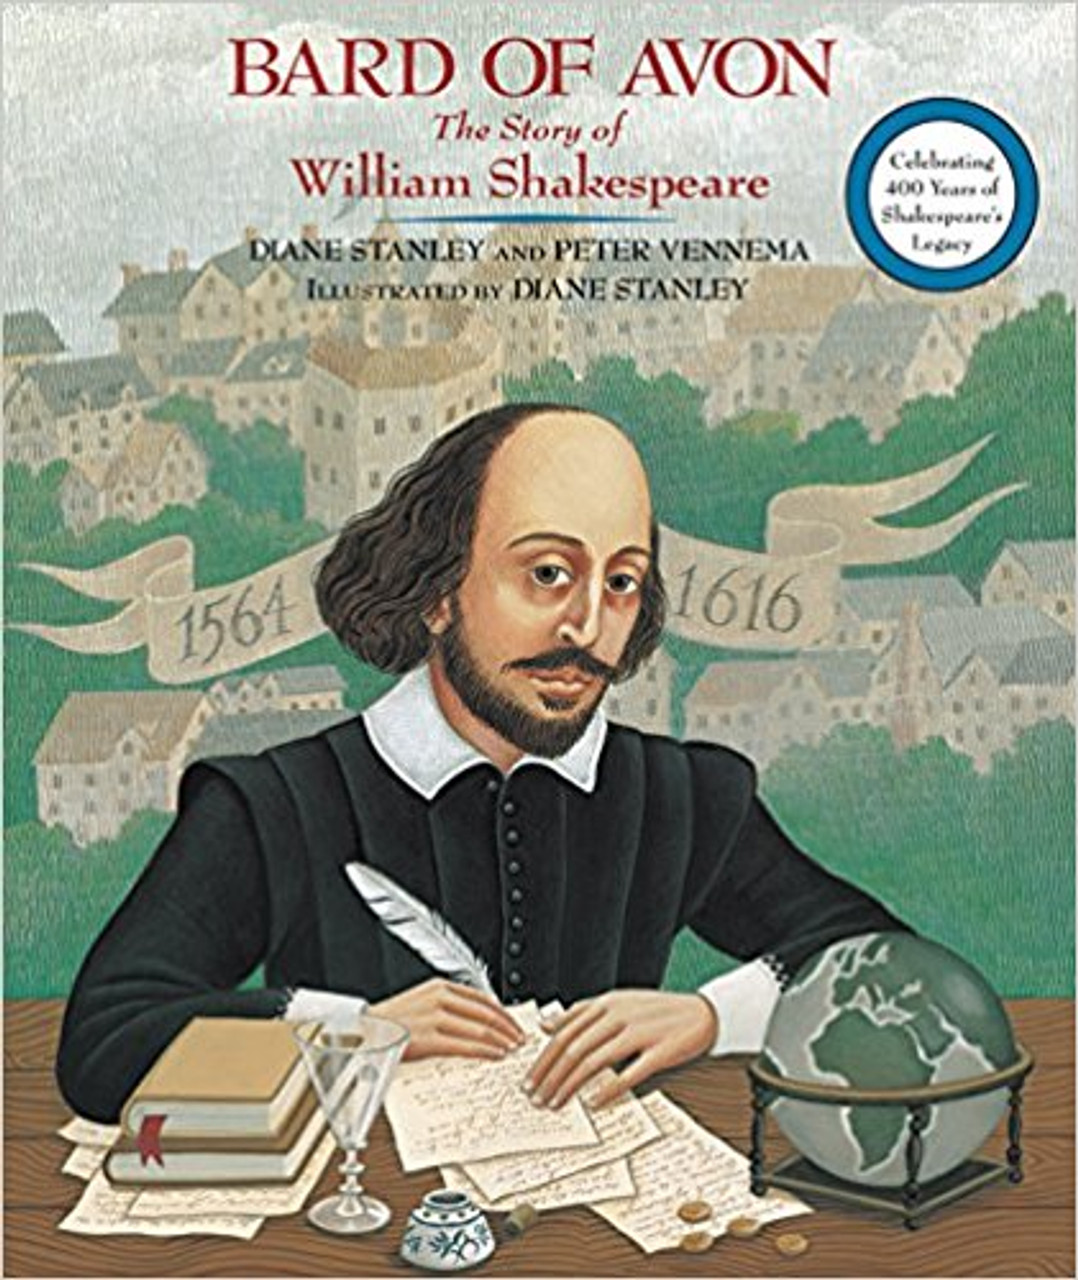 Bard of Avon: The Story of William Shakespeare by Diane Stanley